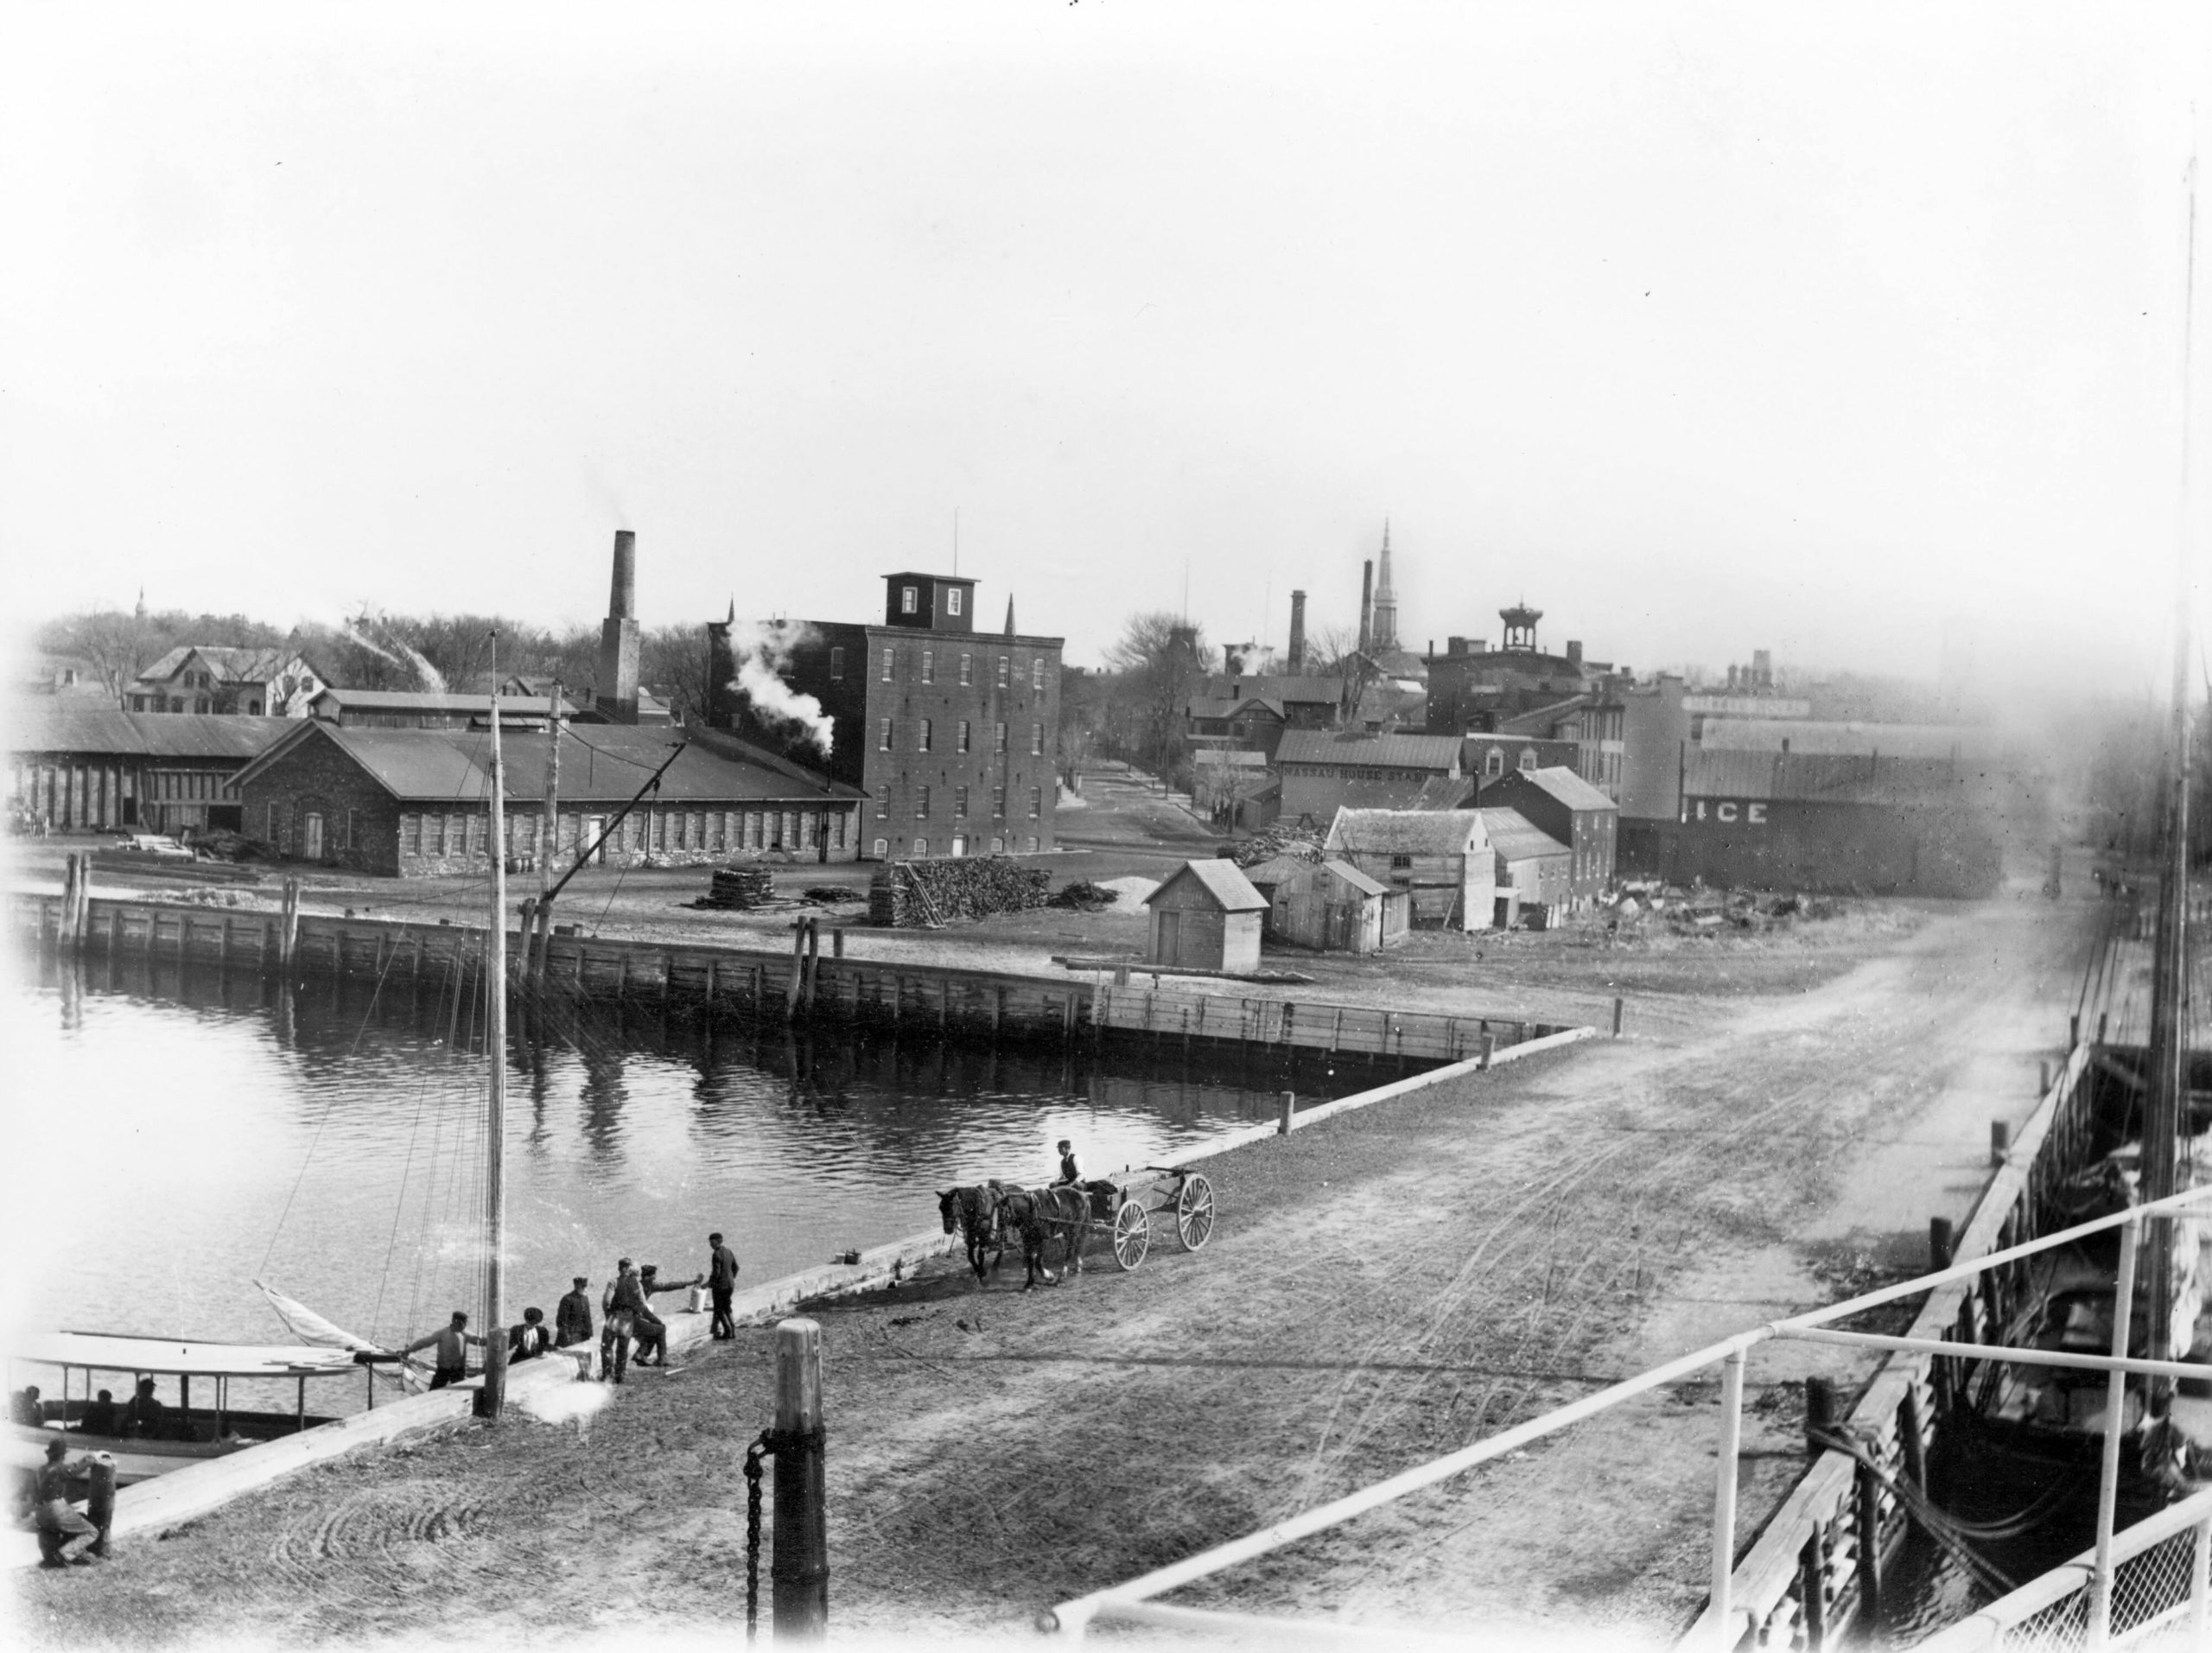 Photo of Long Wharf by William Wallace Tooker. Courtesy of the Kevin J. McCann Collection